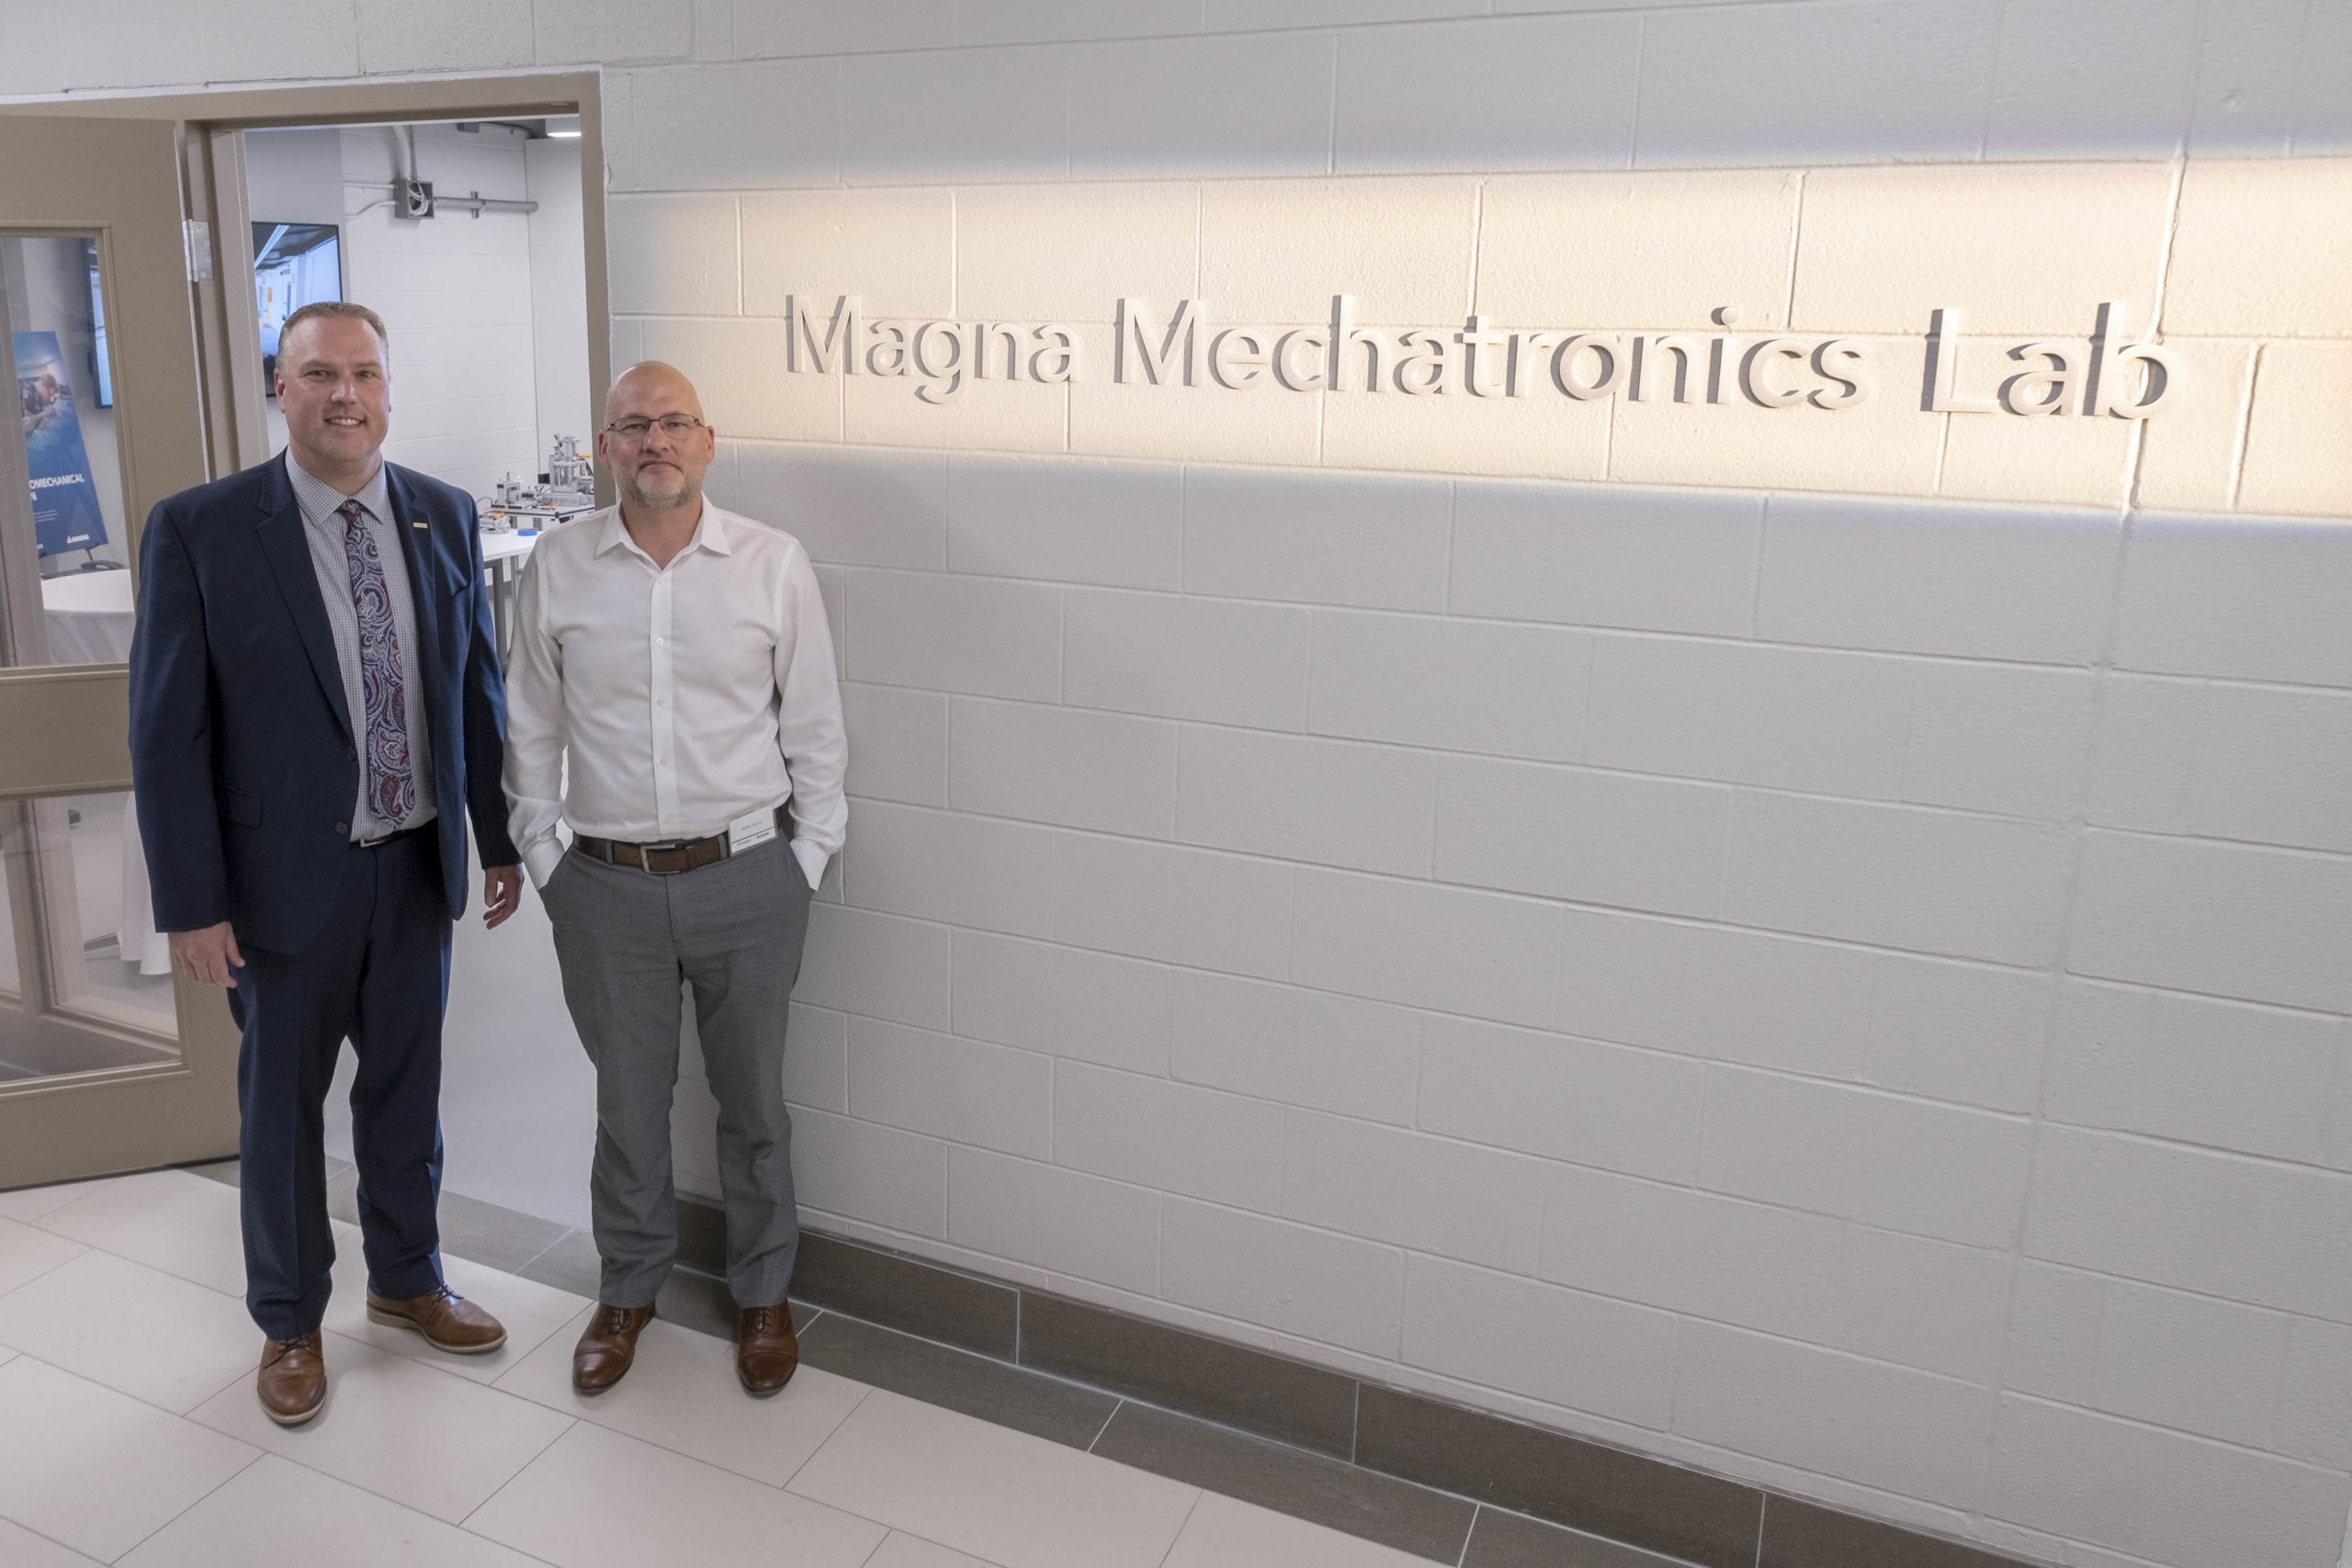 Georgian officially opens the Magna Mechatronics Lab at the Barrie Campus